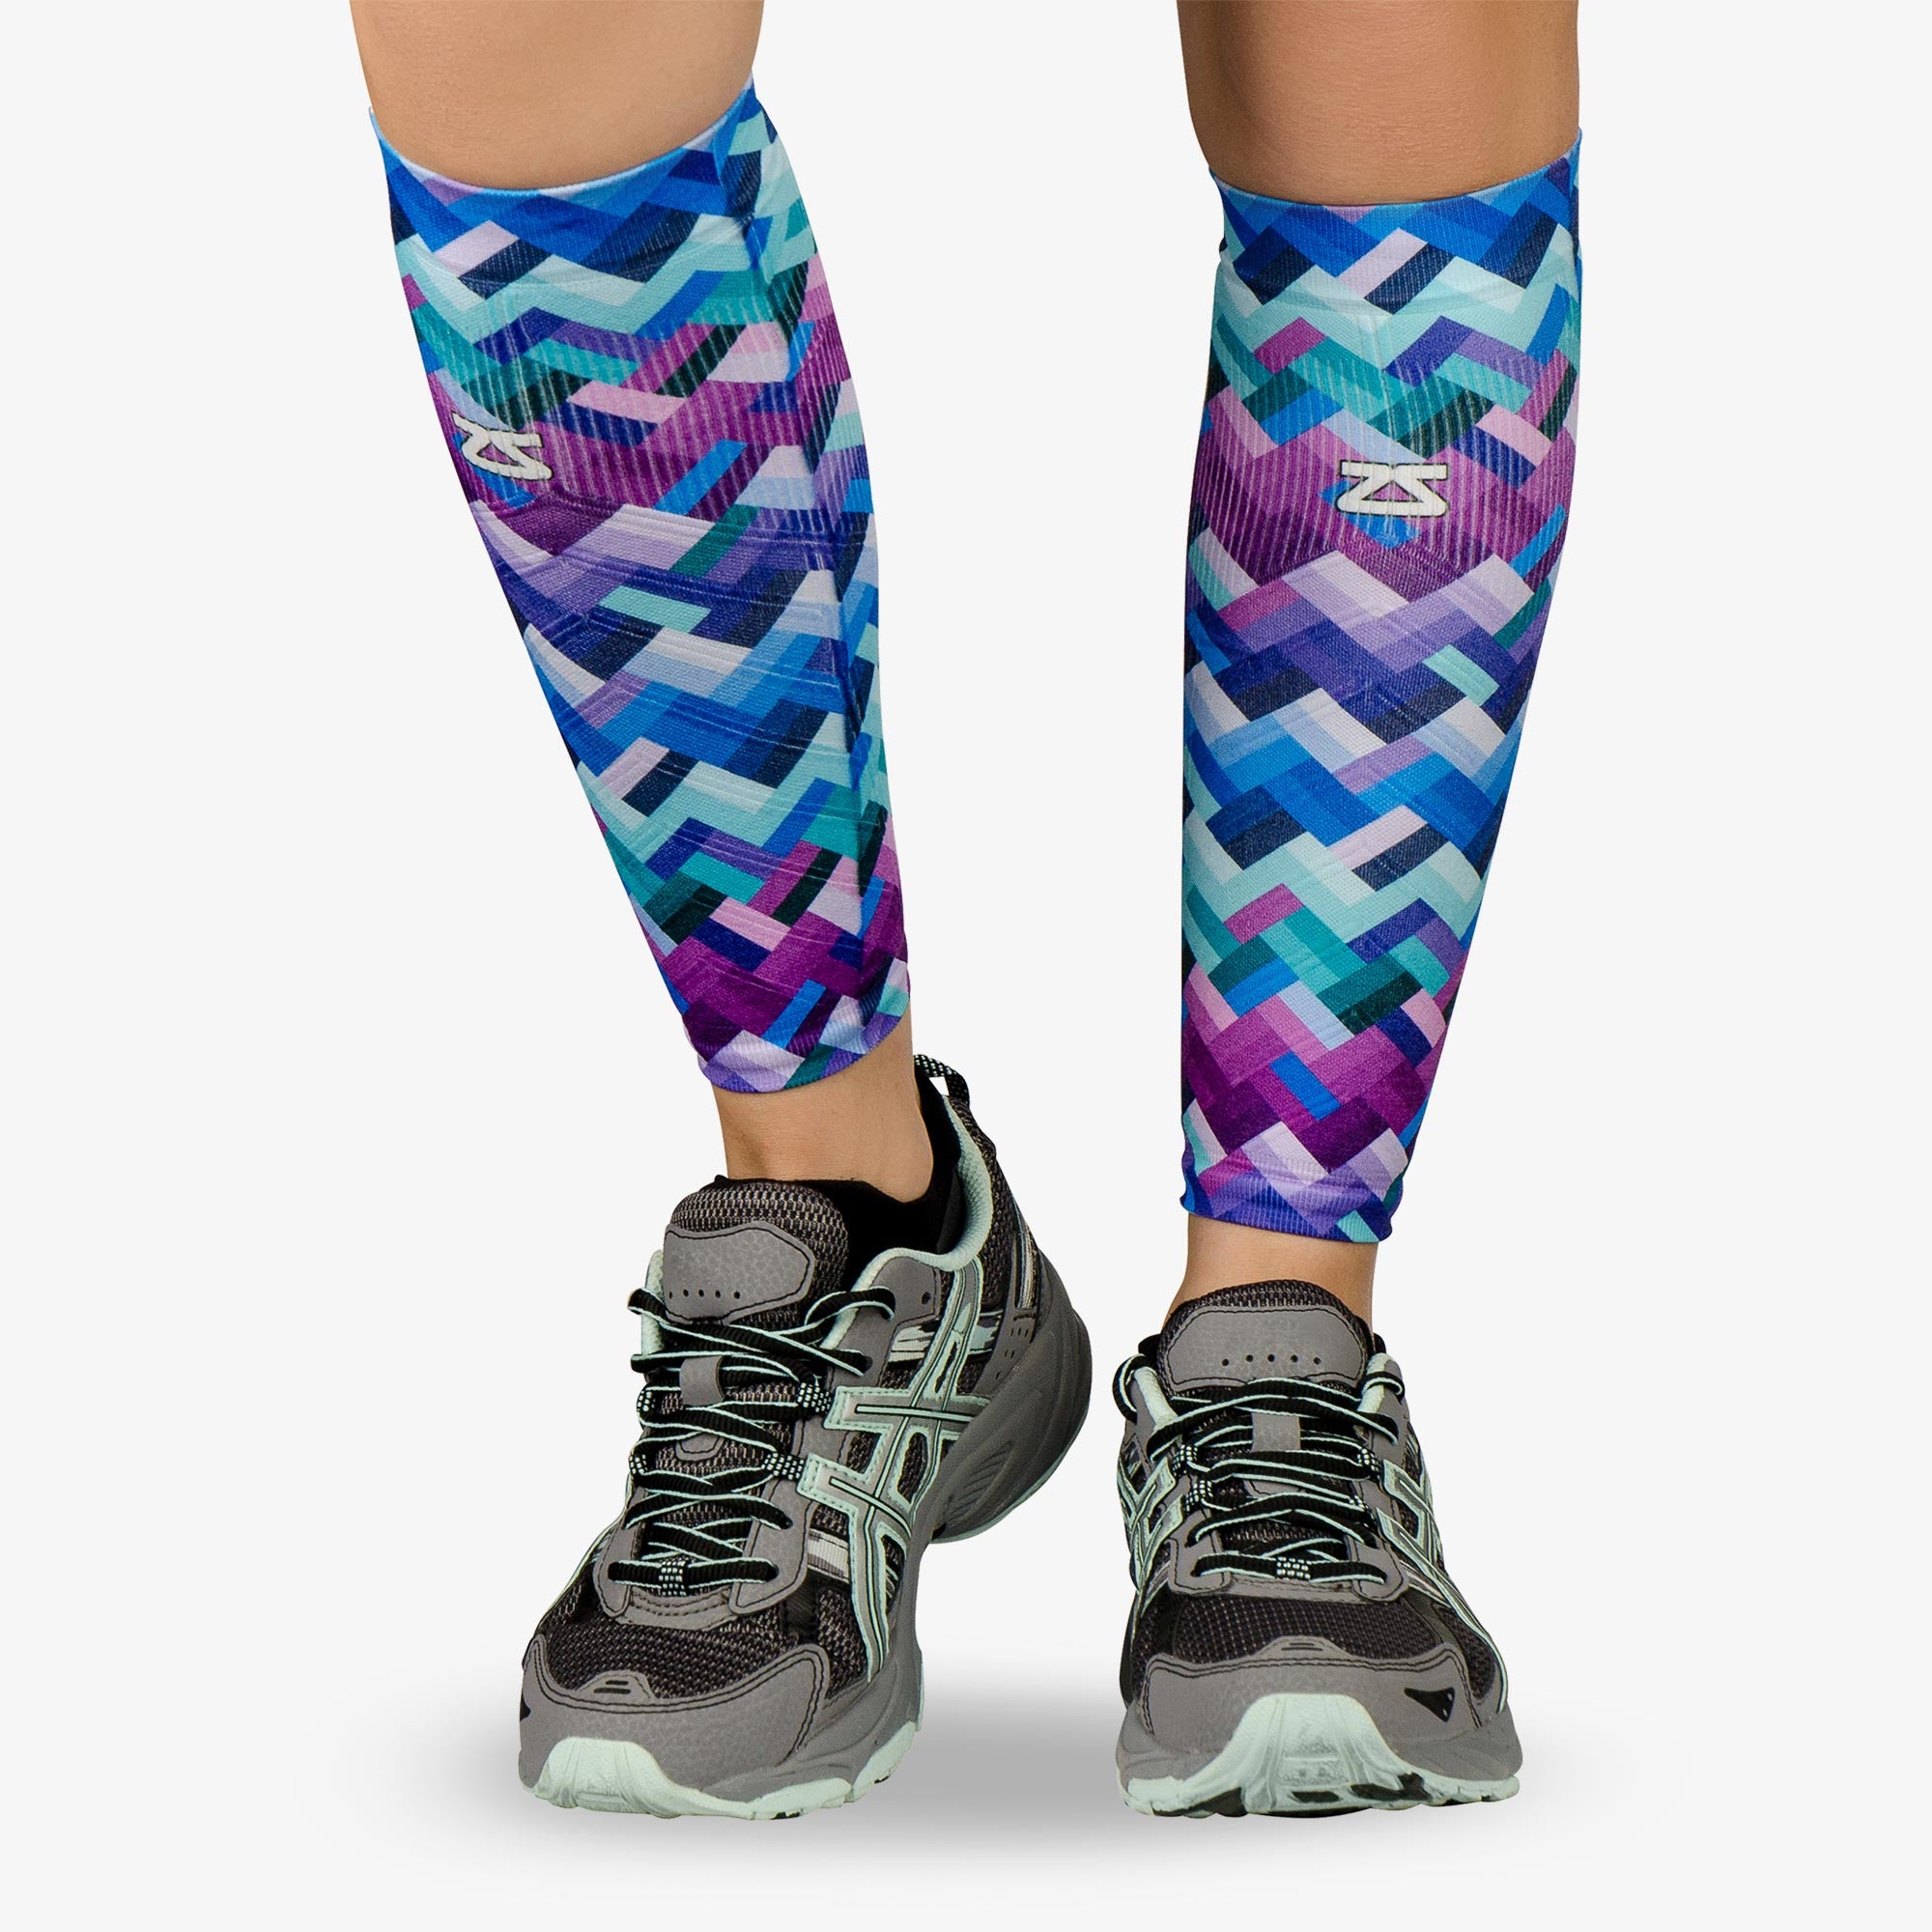 Limited Edition Compression Leg Sleeves, Calf Sleeves